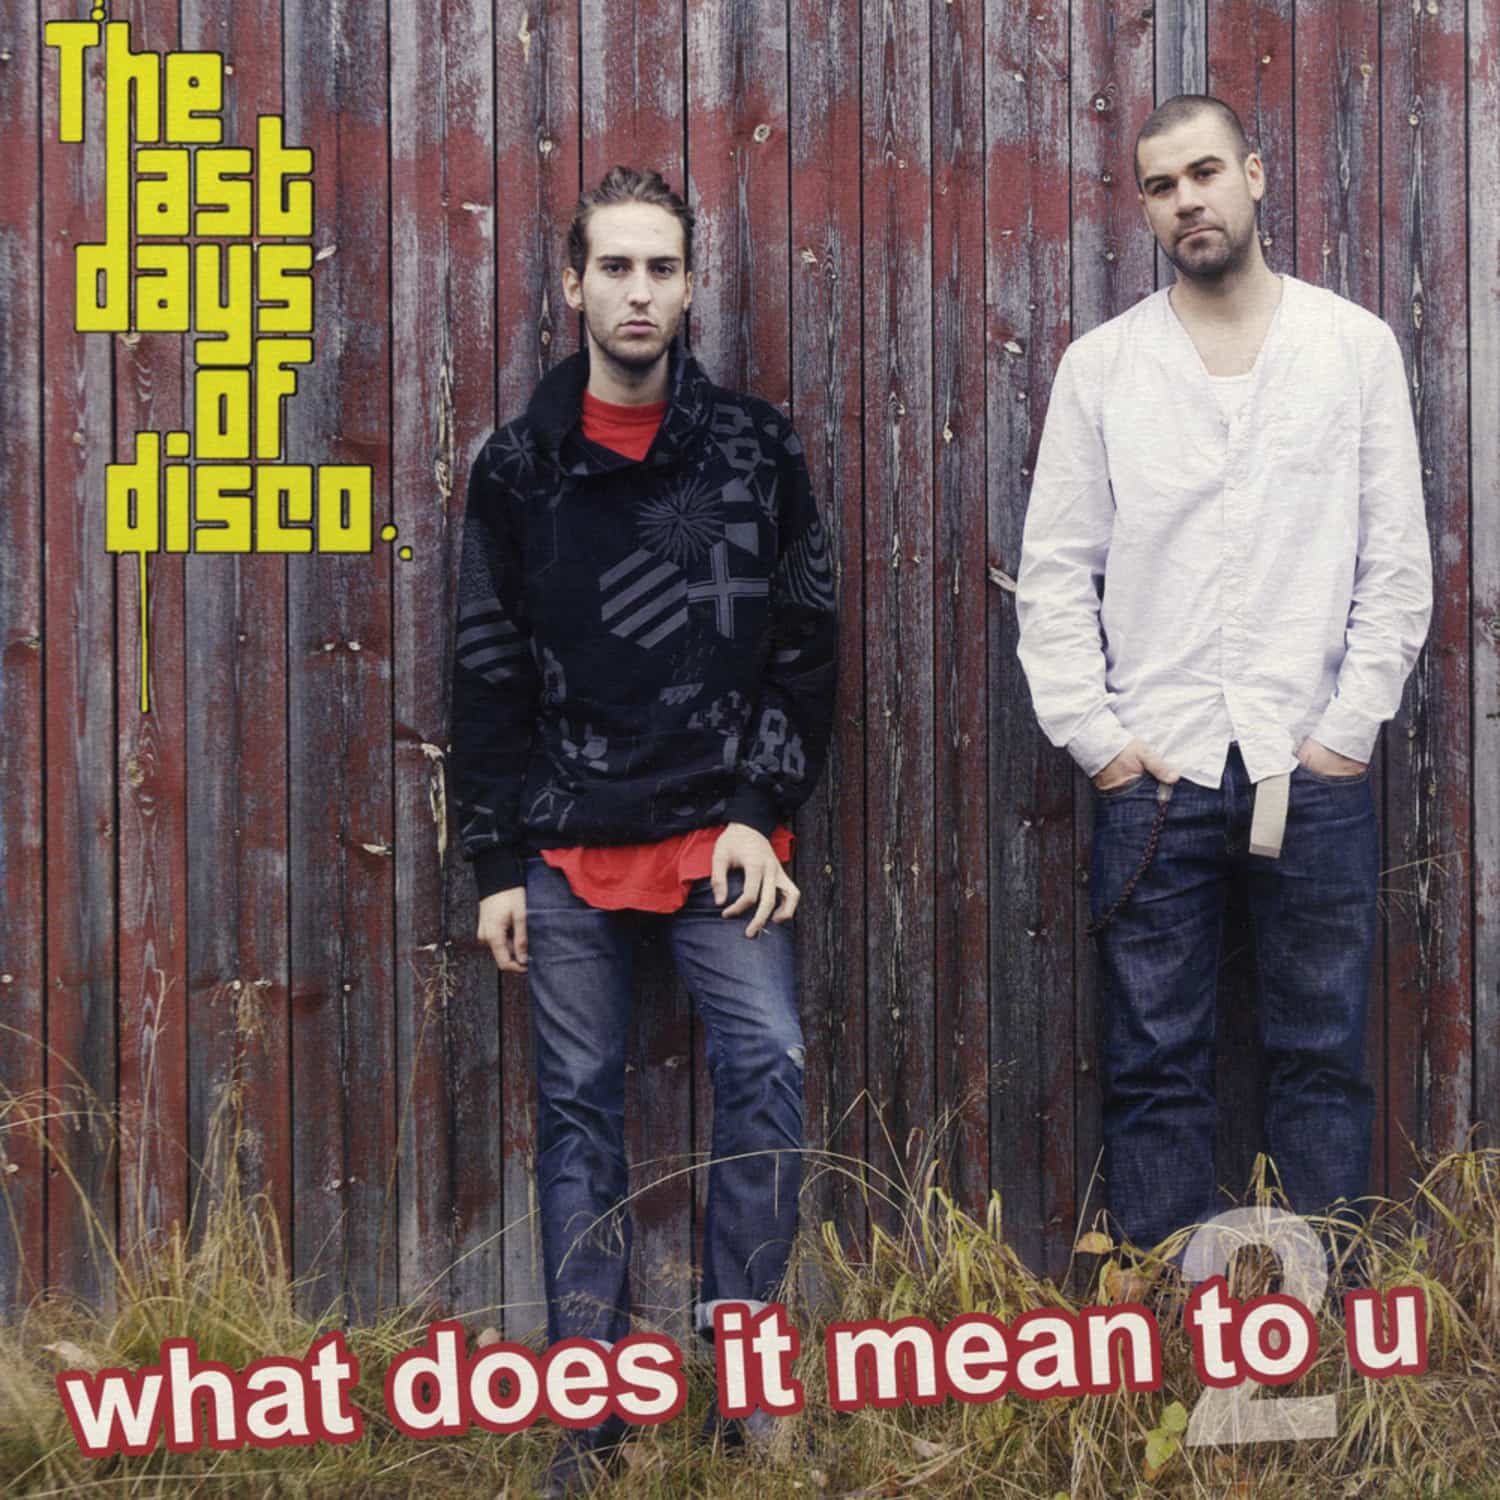 Last Days Of Disco - WHAT DOES IT MEAN 2 U